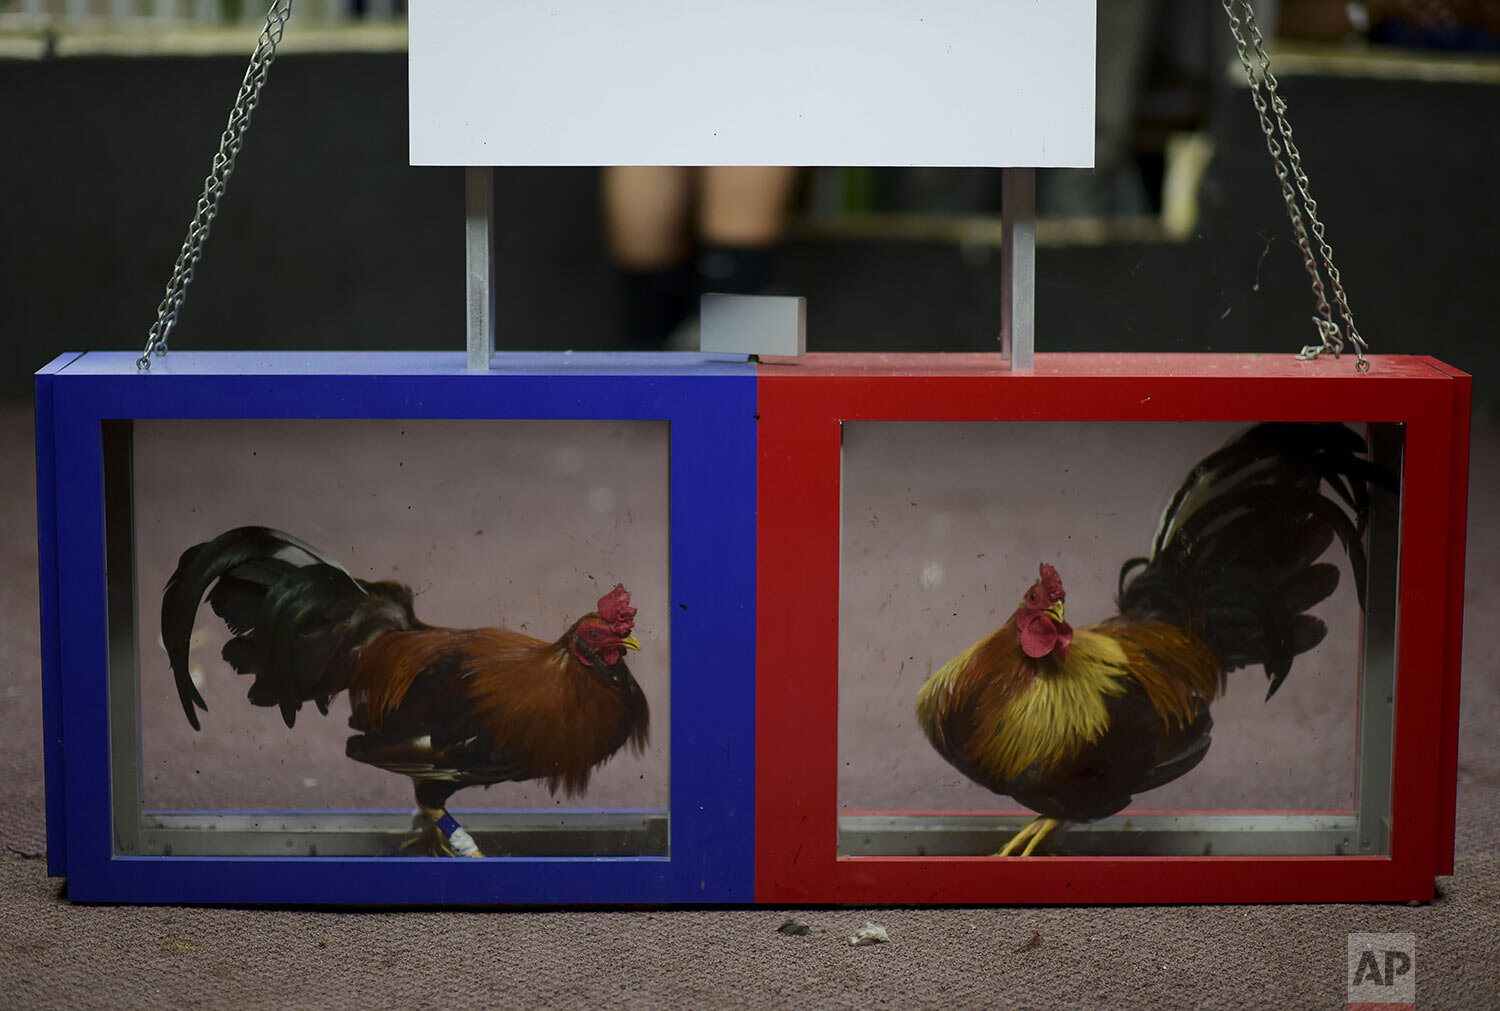  Fighting cocks are kept inside boxes before being made to fight at the Campanillas cockfighting club in Toa Baja, Puerto Rico, Dec. 18, 2019. Puerto Rico’s governor signed a bill authorizing cockfighting in defiance of a federal ban on the practice.